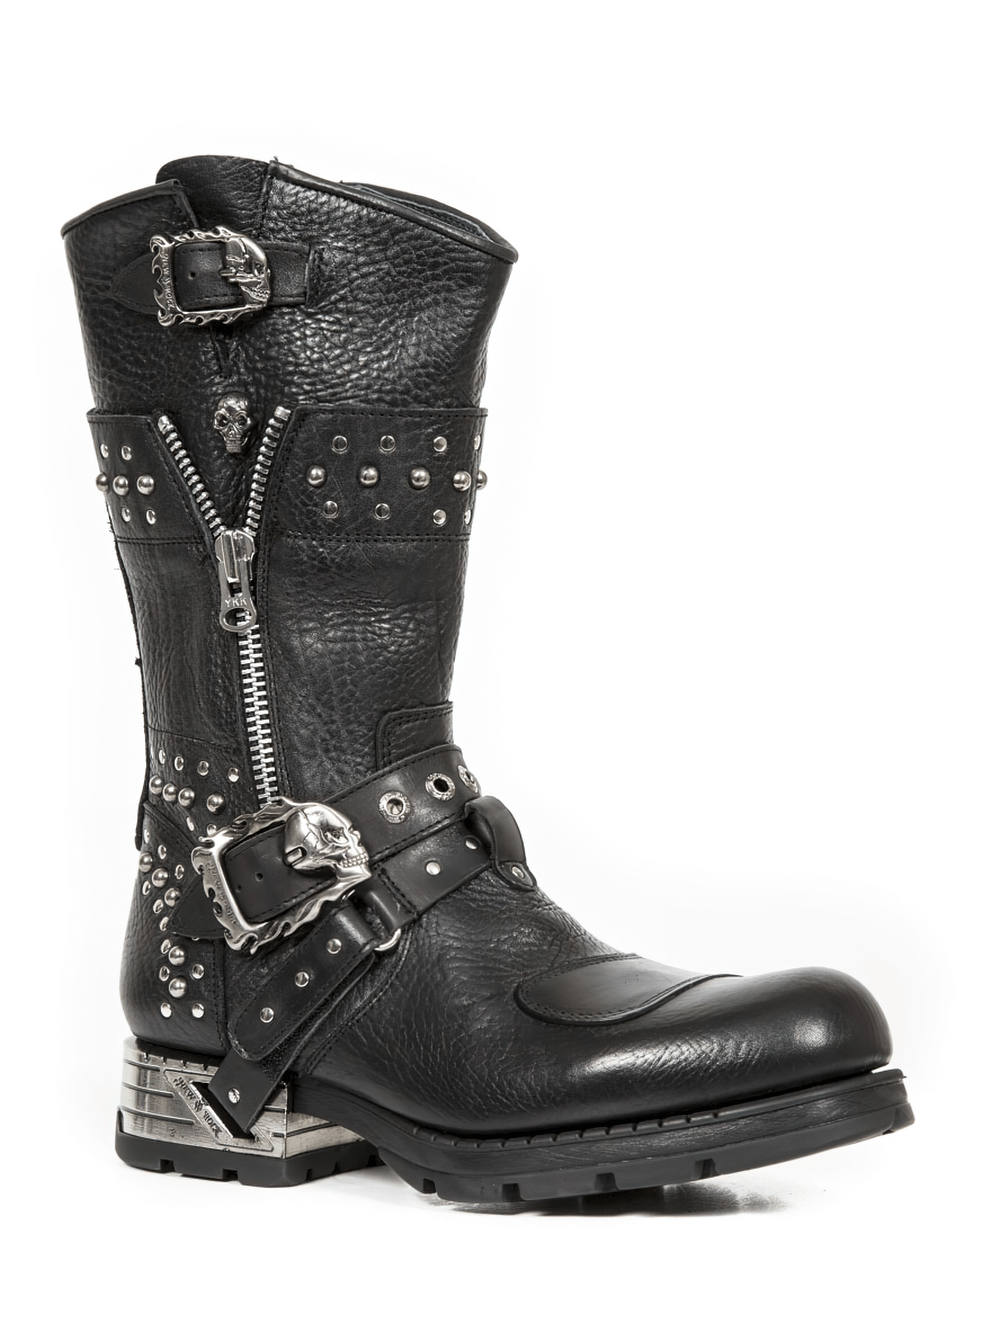 NEW ROCK Leather Biker Boots with Zipper and Rivets